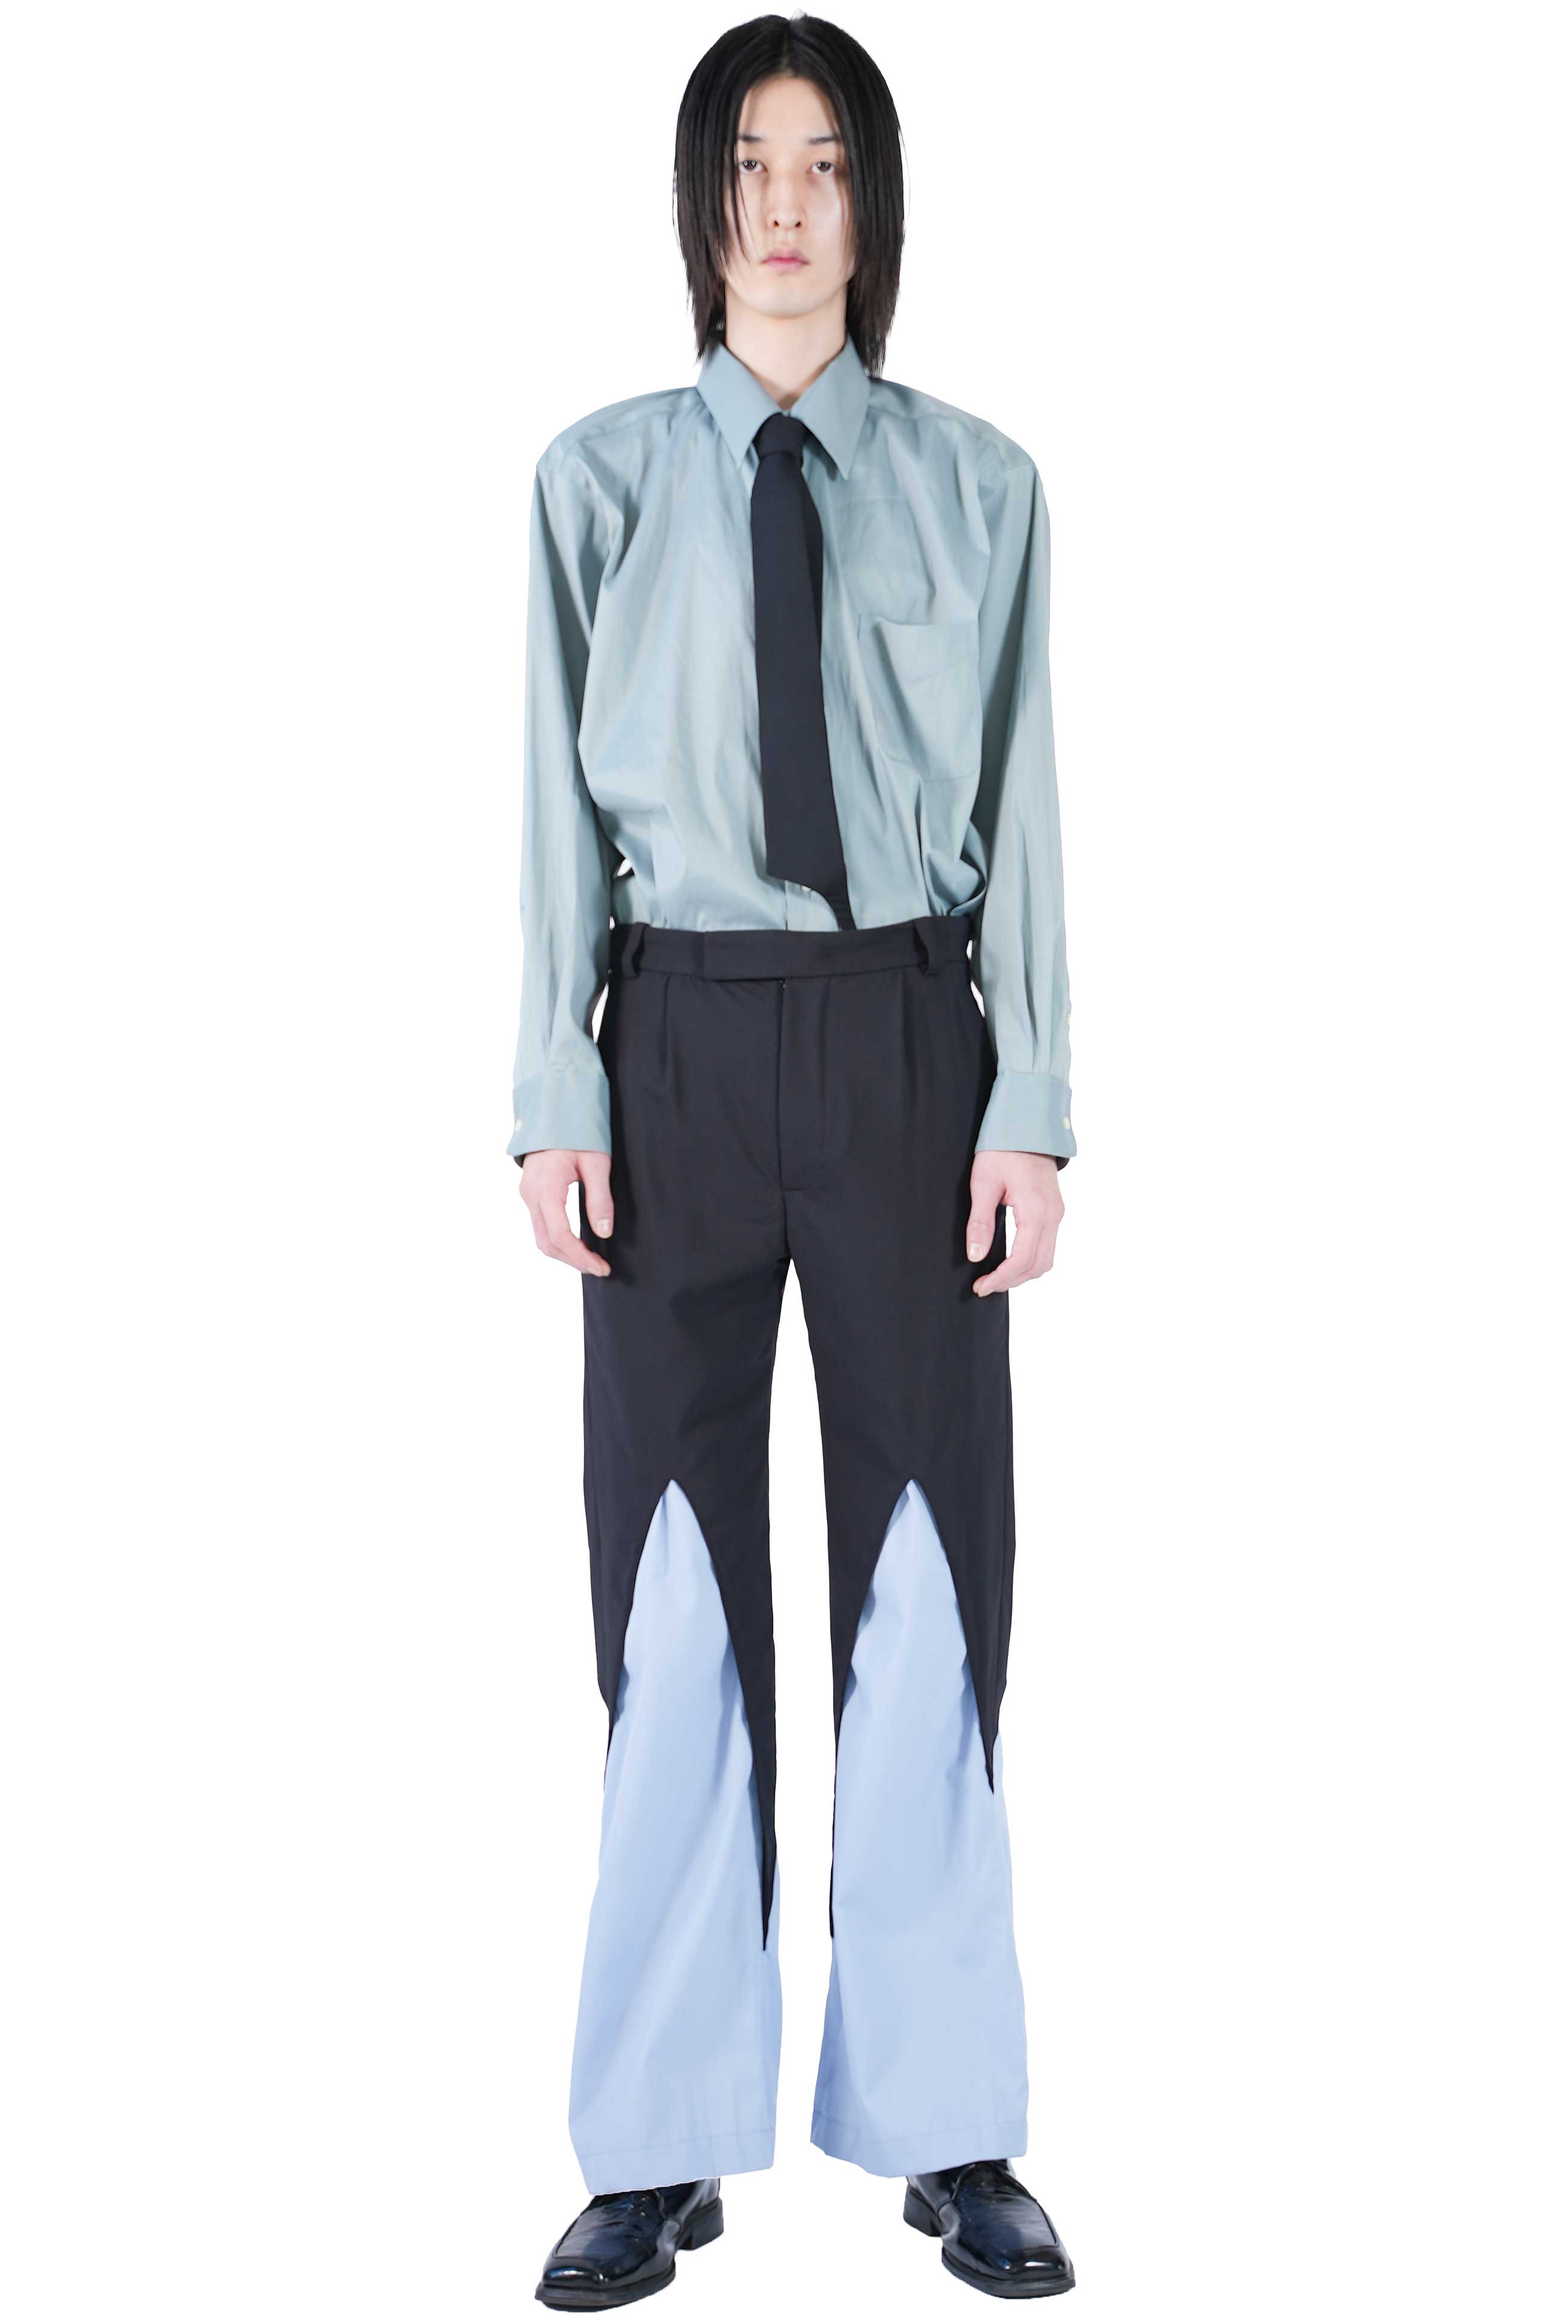 STRONGTHE BLUE TWO-TONE TROUSERS